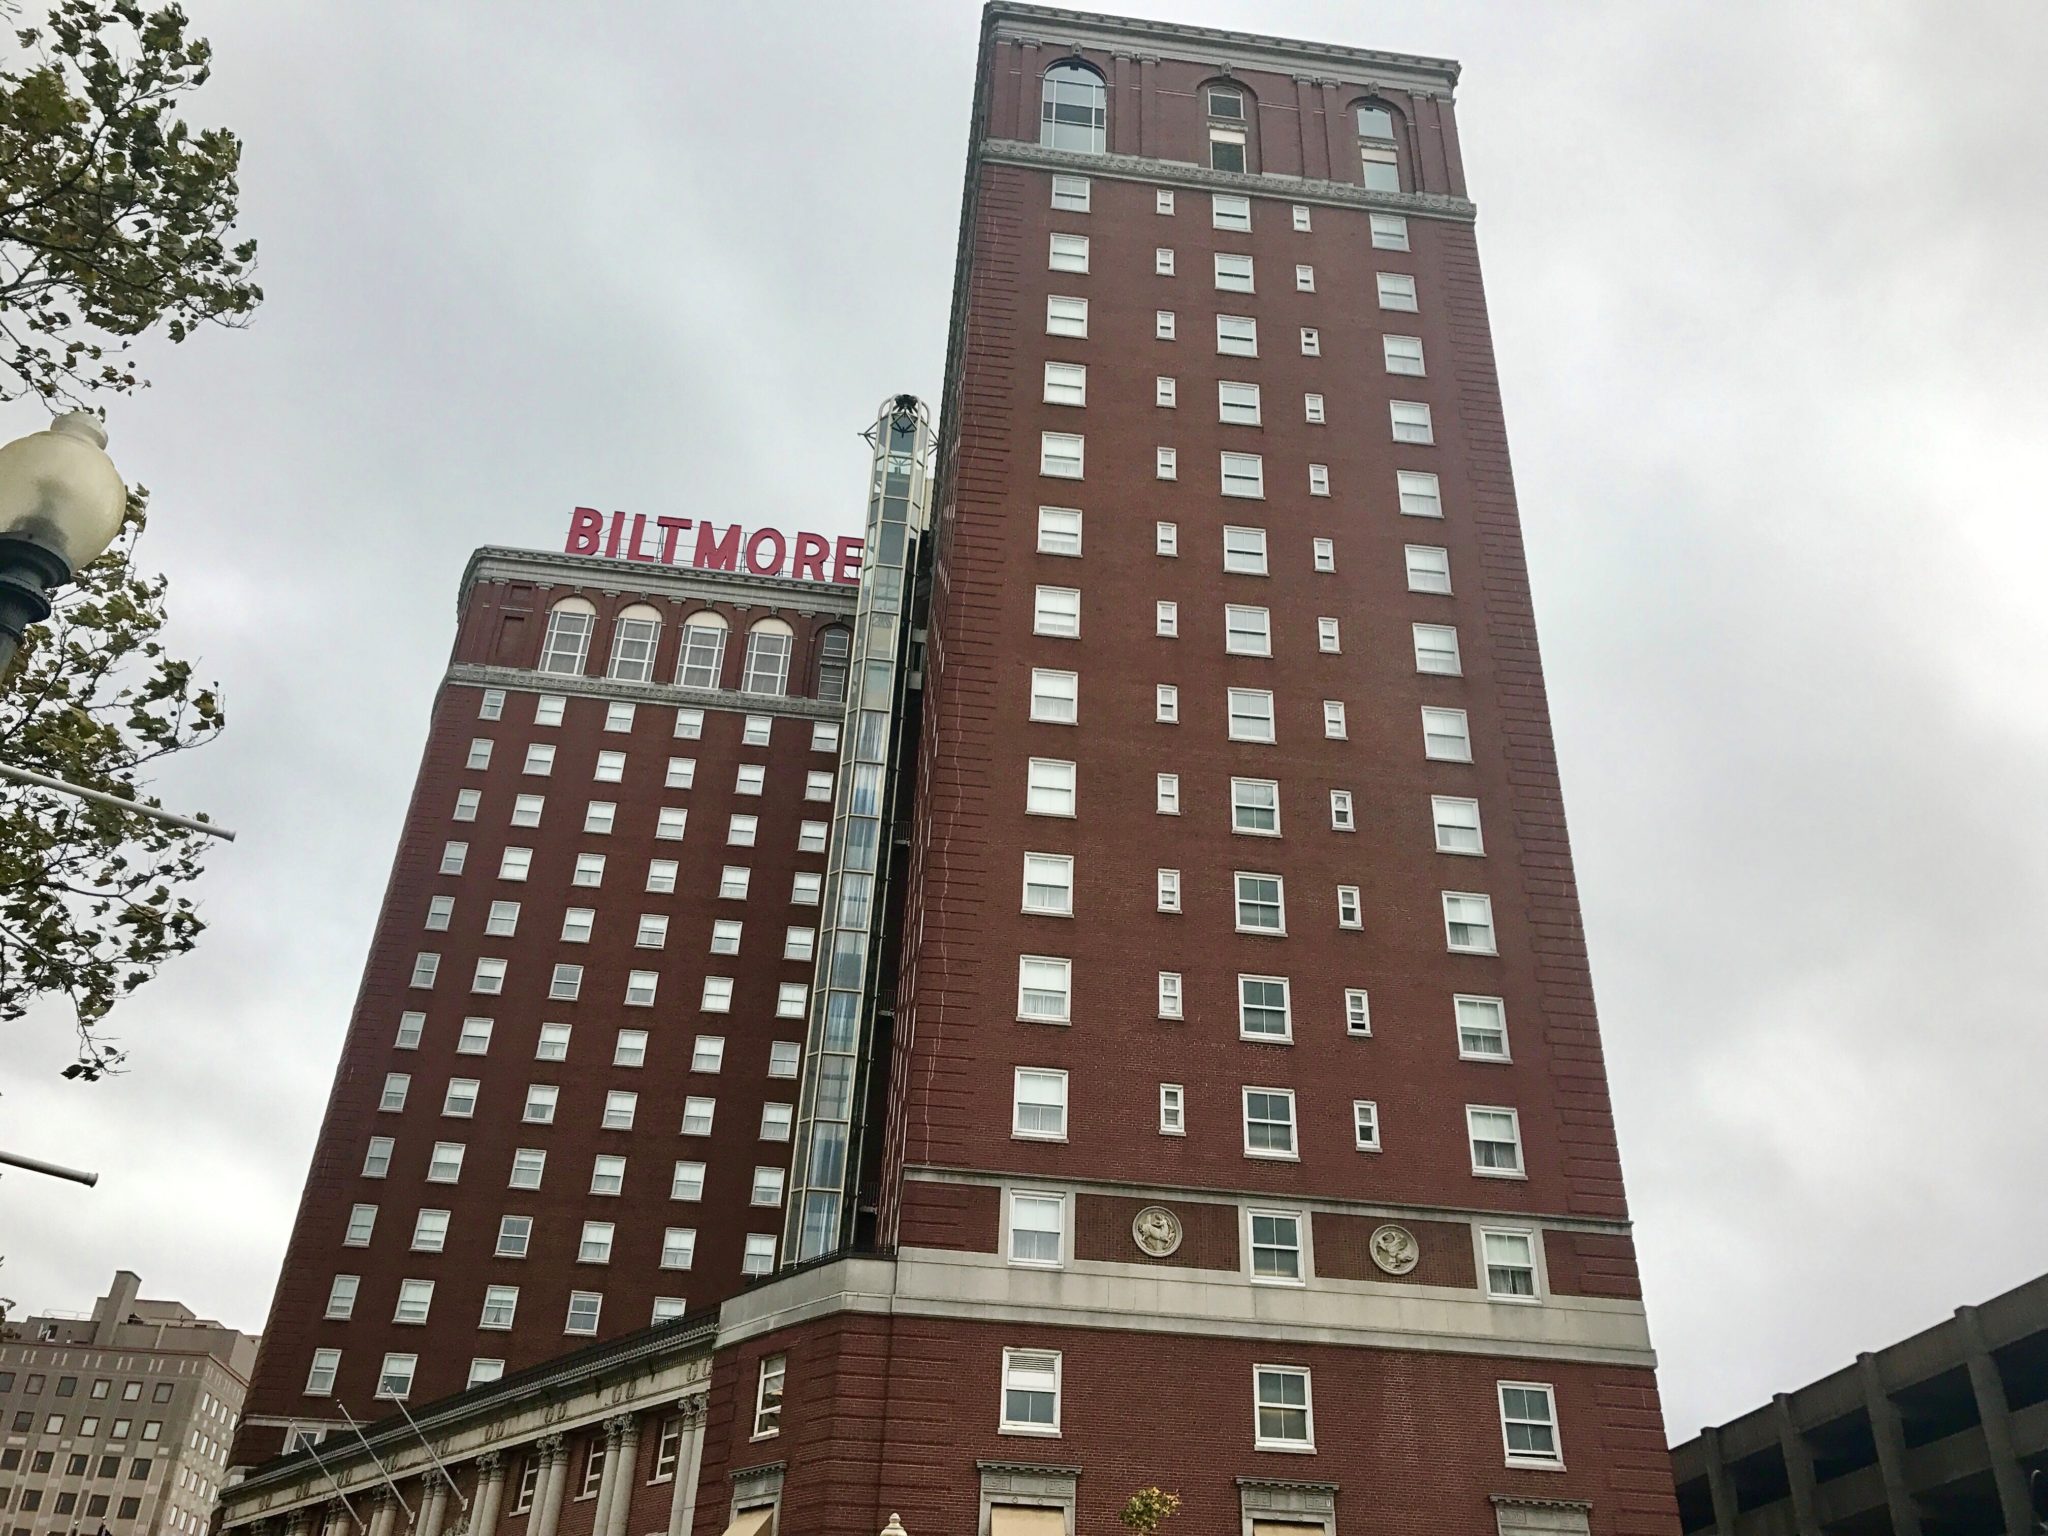 THE BILTMORE Providence has been sold, according to a press release on Hotel Online. / PBN FILE PHOTO